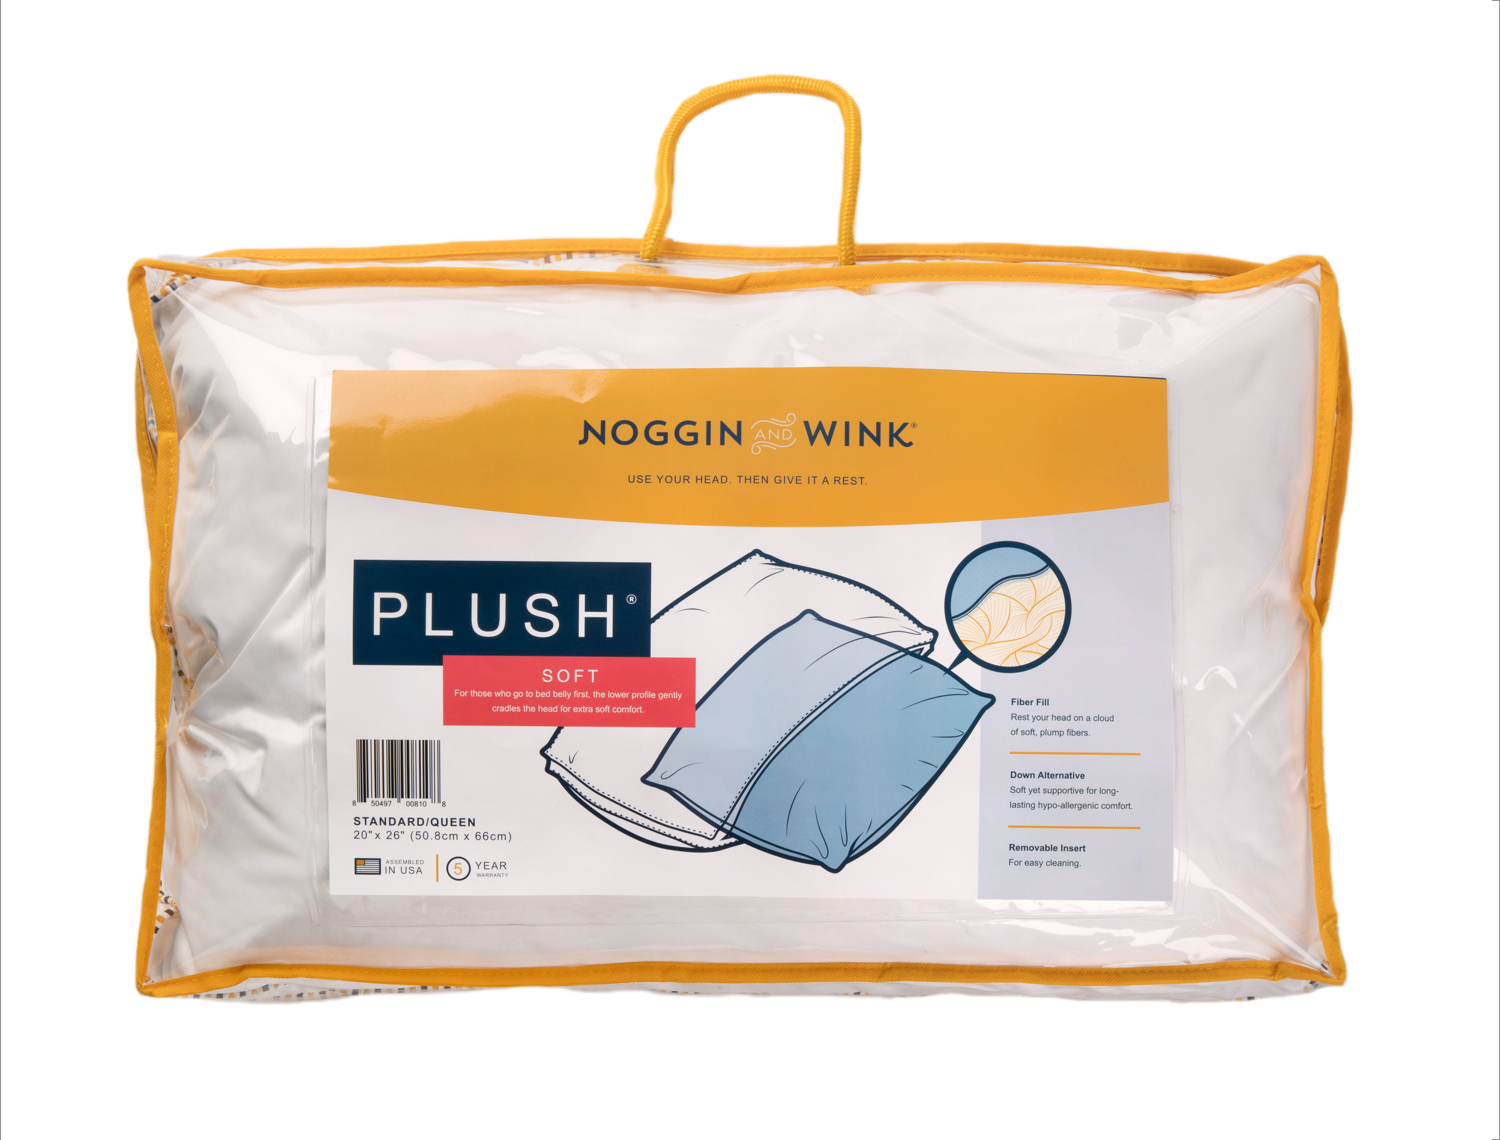 Noggin & Wink Soft Plush Microfiber Belly Sleeper Pillow - Premium Hypoallergenic Down Alternative Stomach Sleeping Pillow with Washable Cover